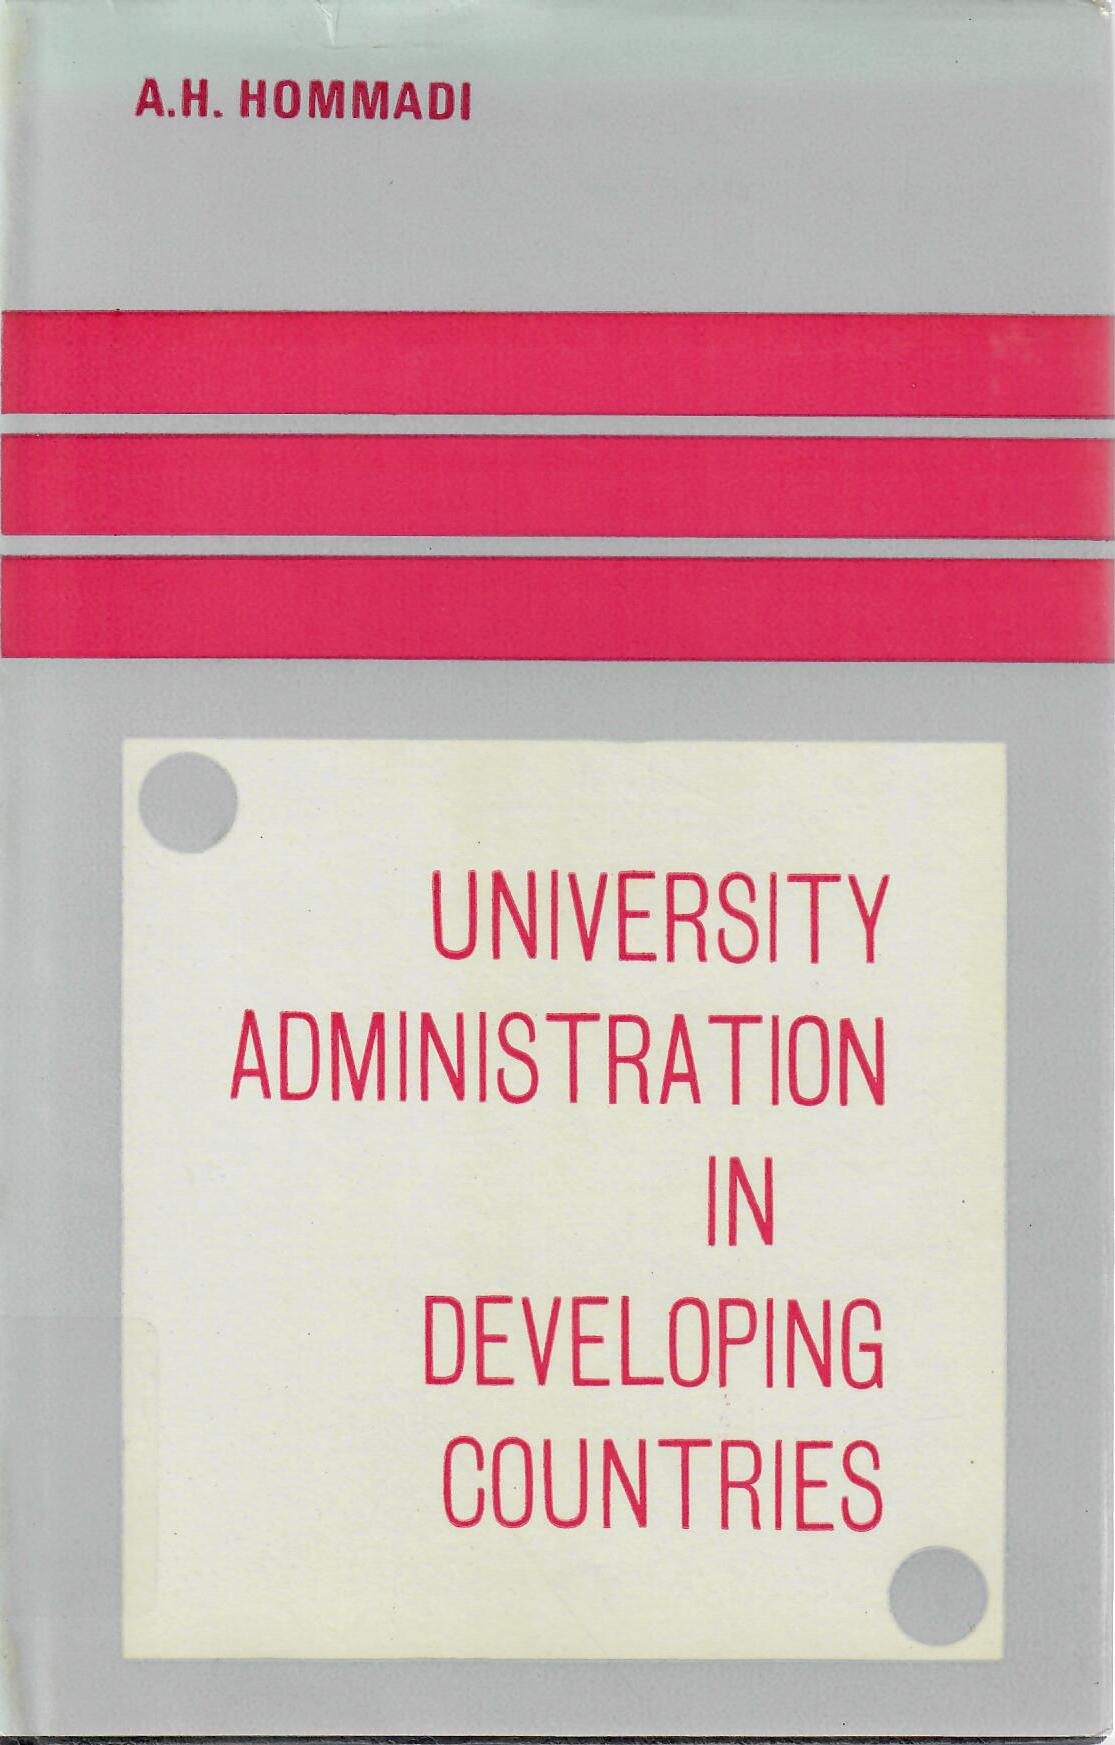 UNIVERSITY ADMINISTRATION IN DEVELOPING COUNTRIES